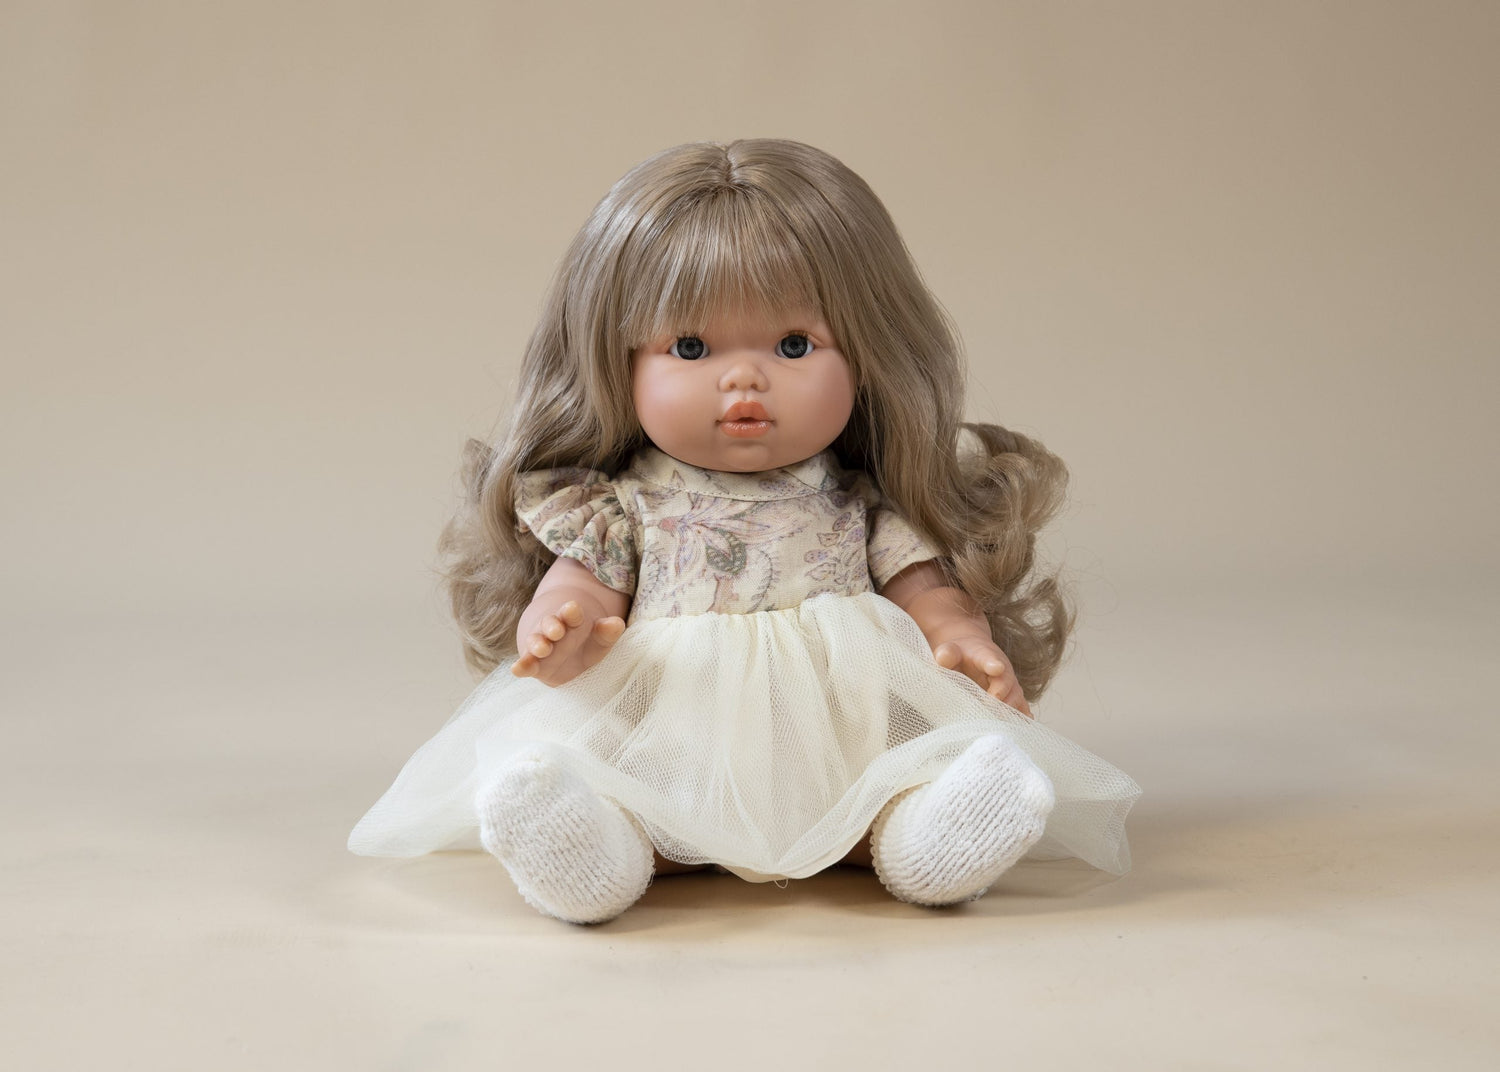 LLORENS DOLLS | MINI COLETTOS DOLL - LYLA by LLORENS DOLLS - The Playful Collective